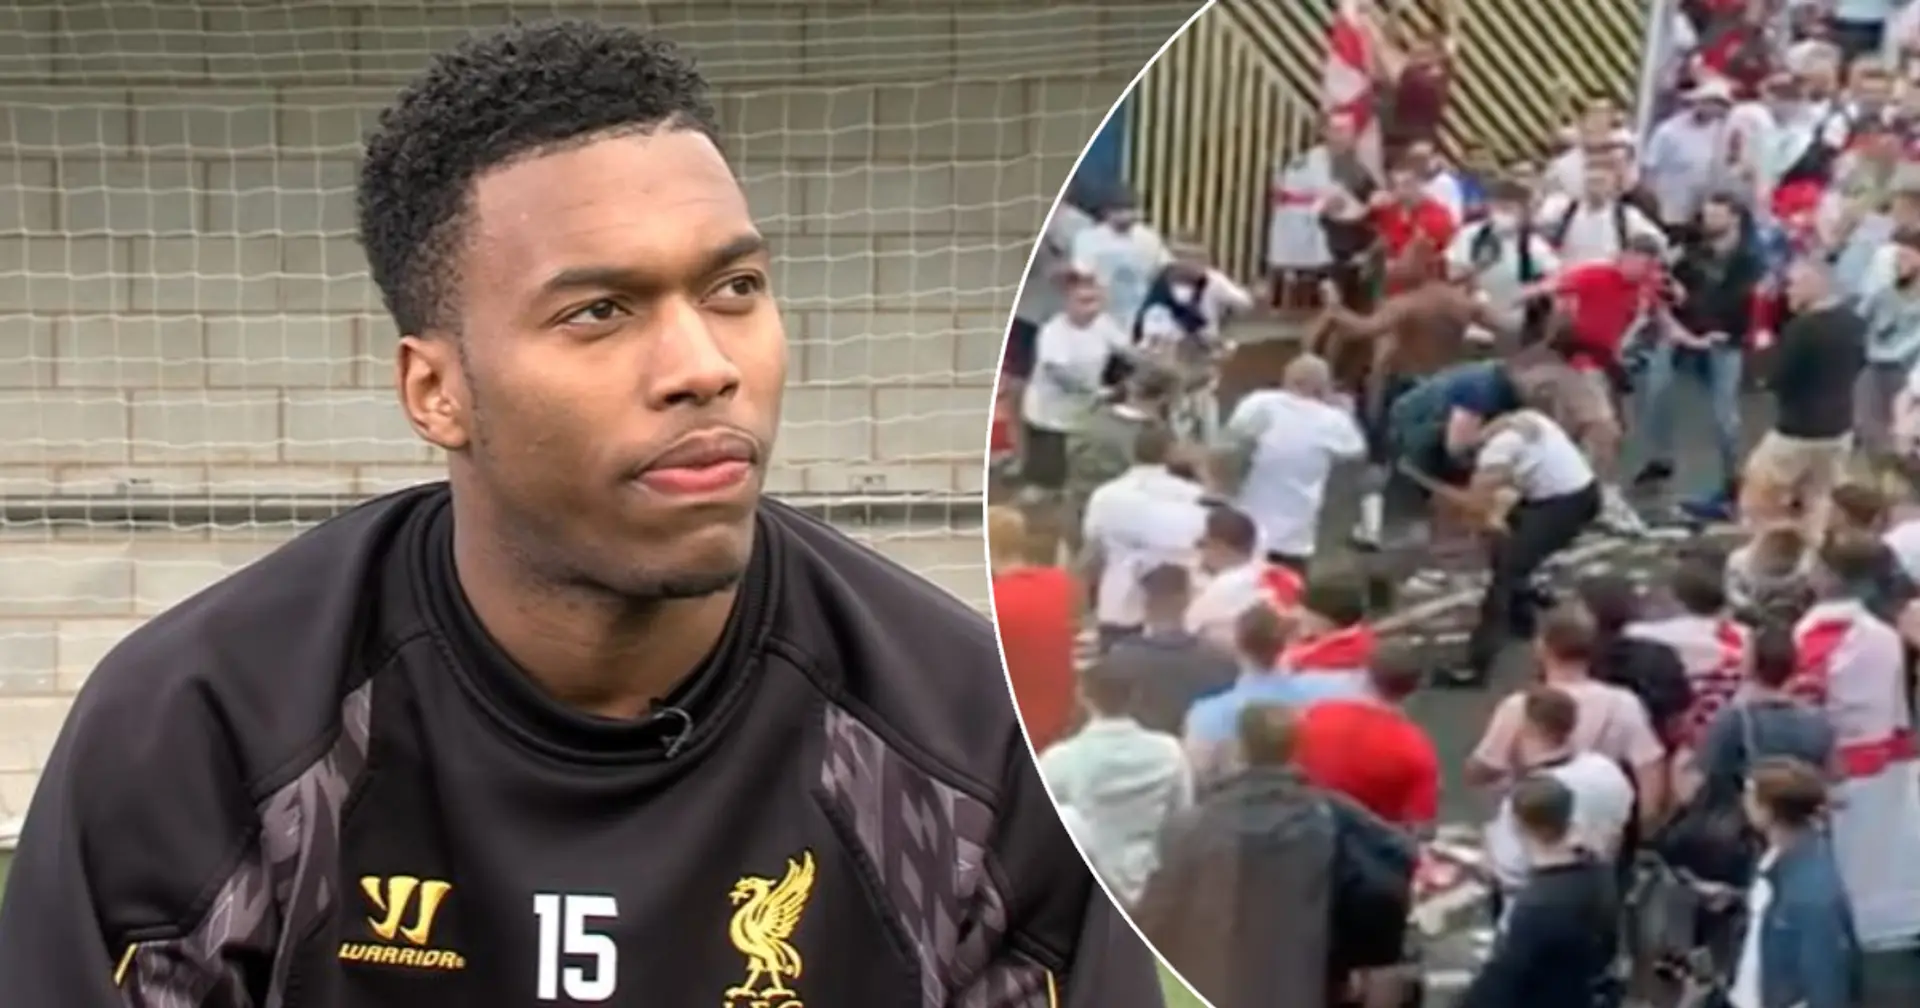 'Stay off the booze': Daniel Sturridge's advice to fans who fight at football matches or racially abuse players